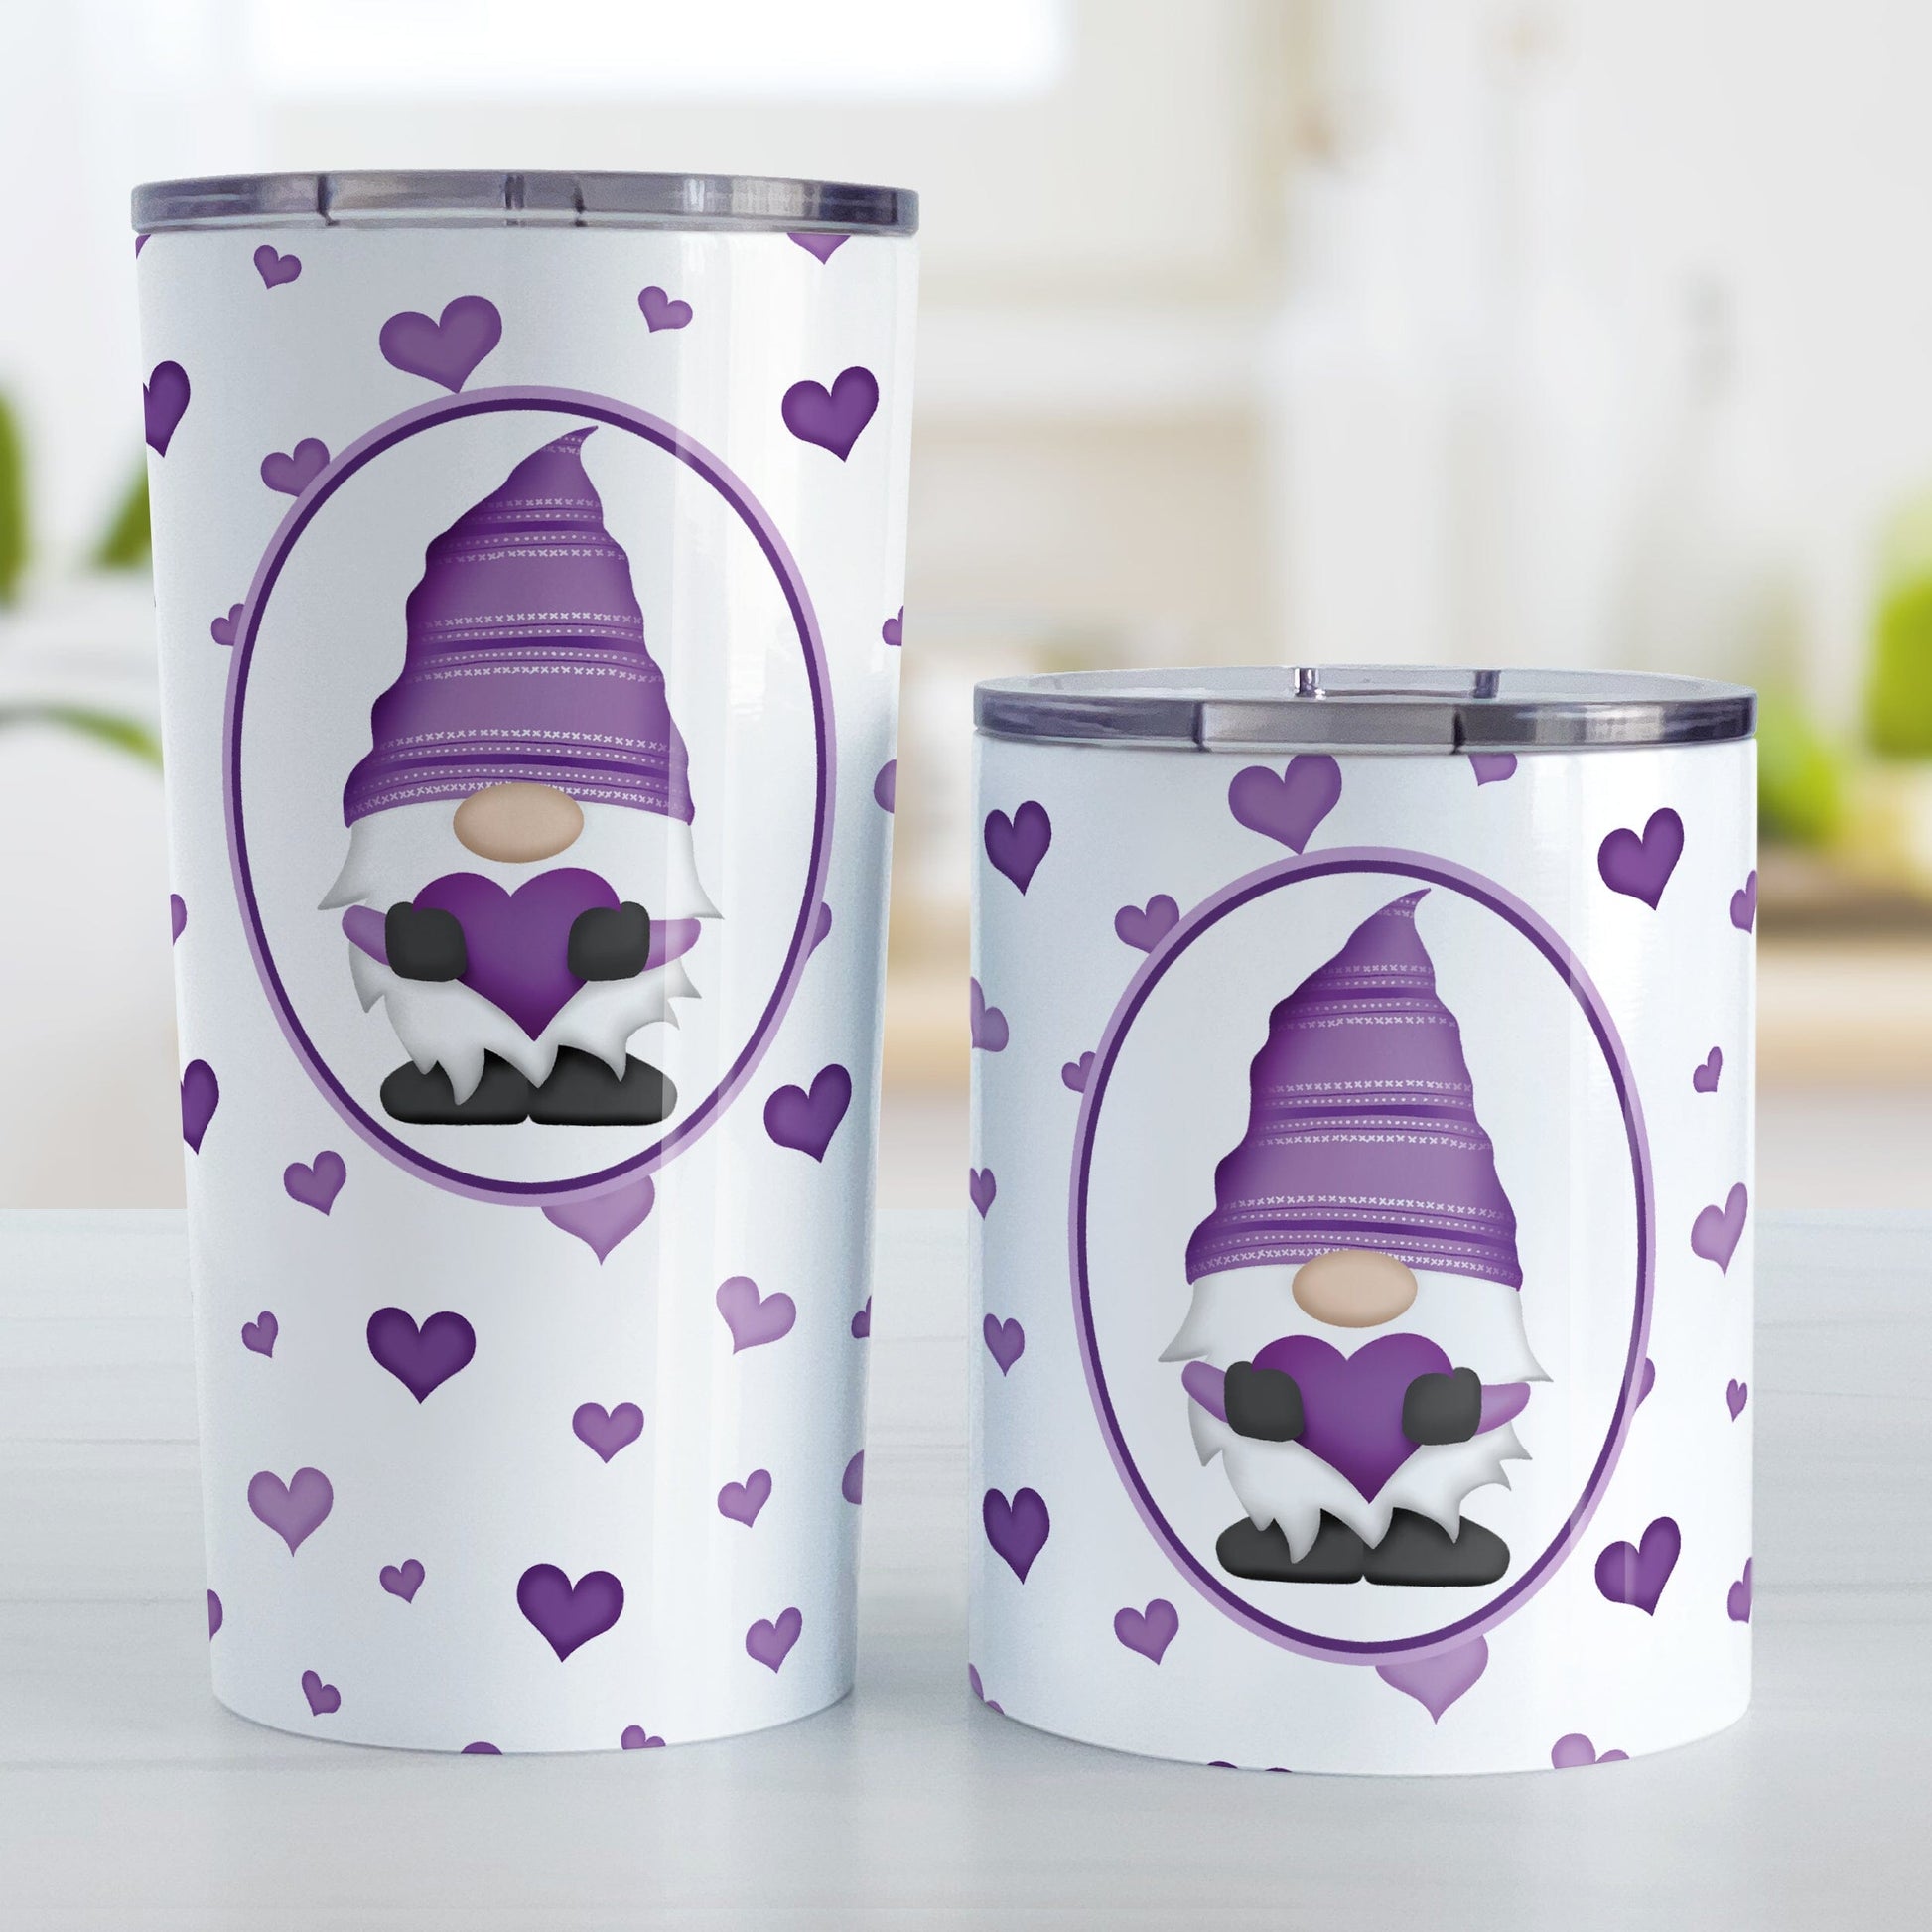 Purple Gnome Dainty Hearts Tumbler Cup (20oz or 10oz) at Amy's Coffee Mugs. Stainless steel tumbler cups designed with an adorable purple gnome holding a heart in a white oval over a pattern of cute and dainty hearts in different shades of purple that wrap around the cups. Photo shows both sized cups on a table next to each other. 